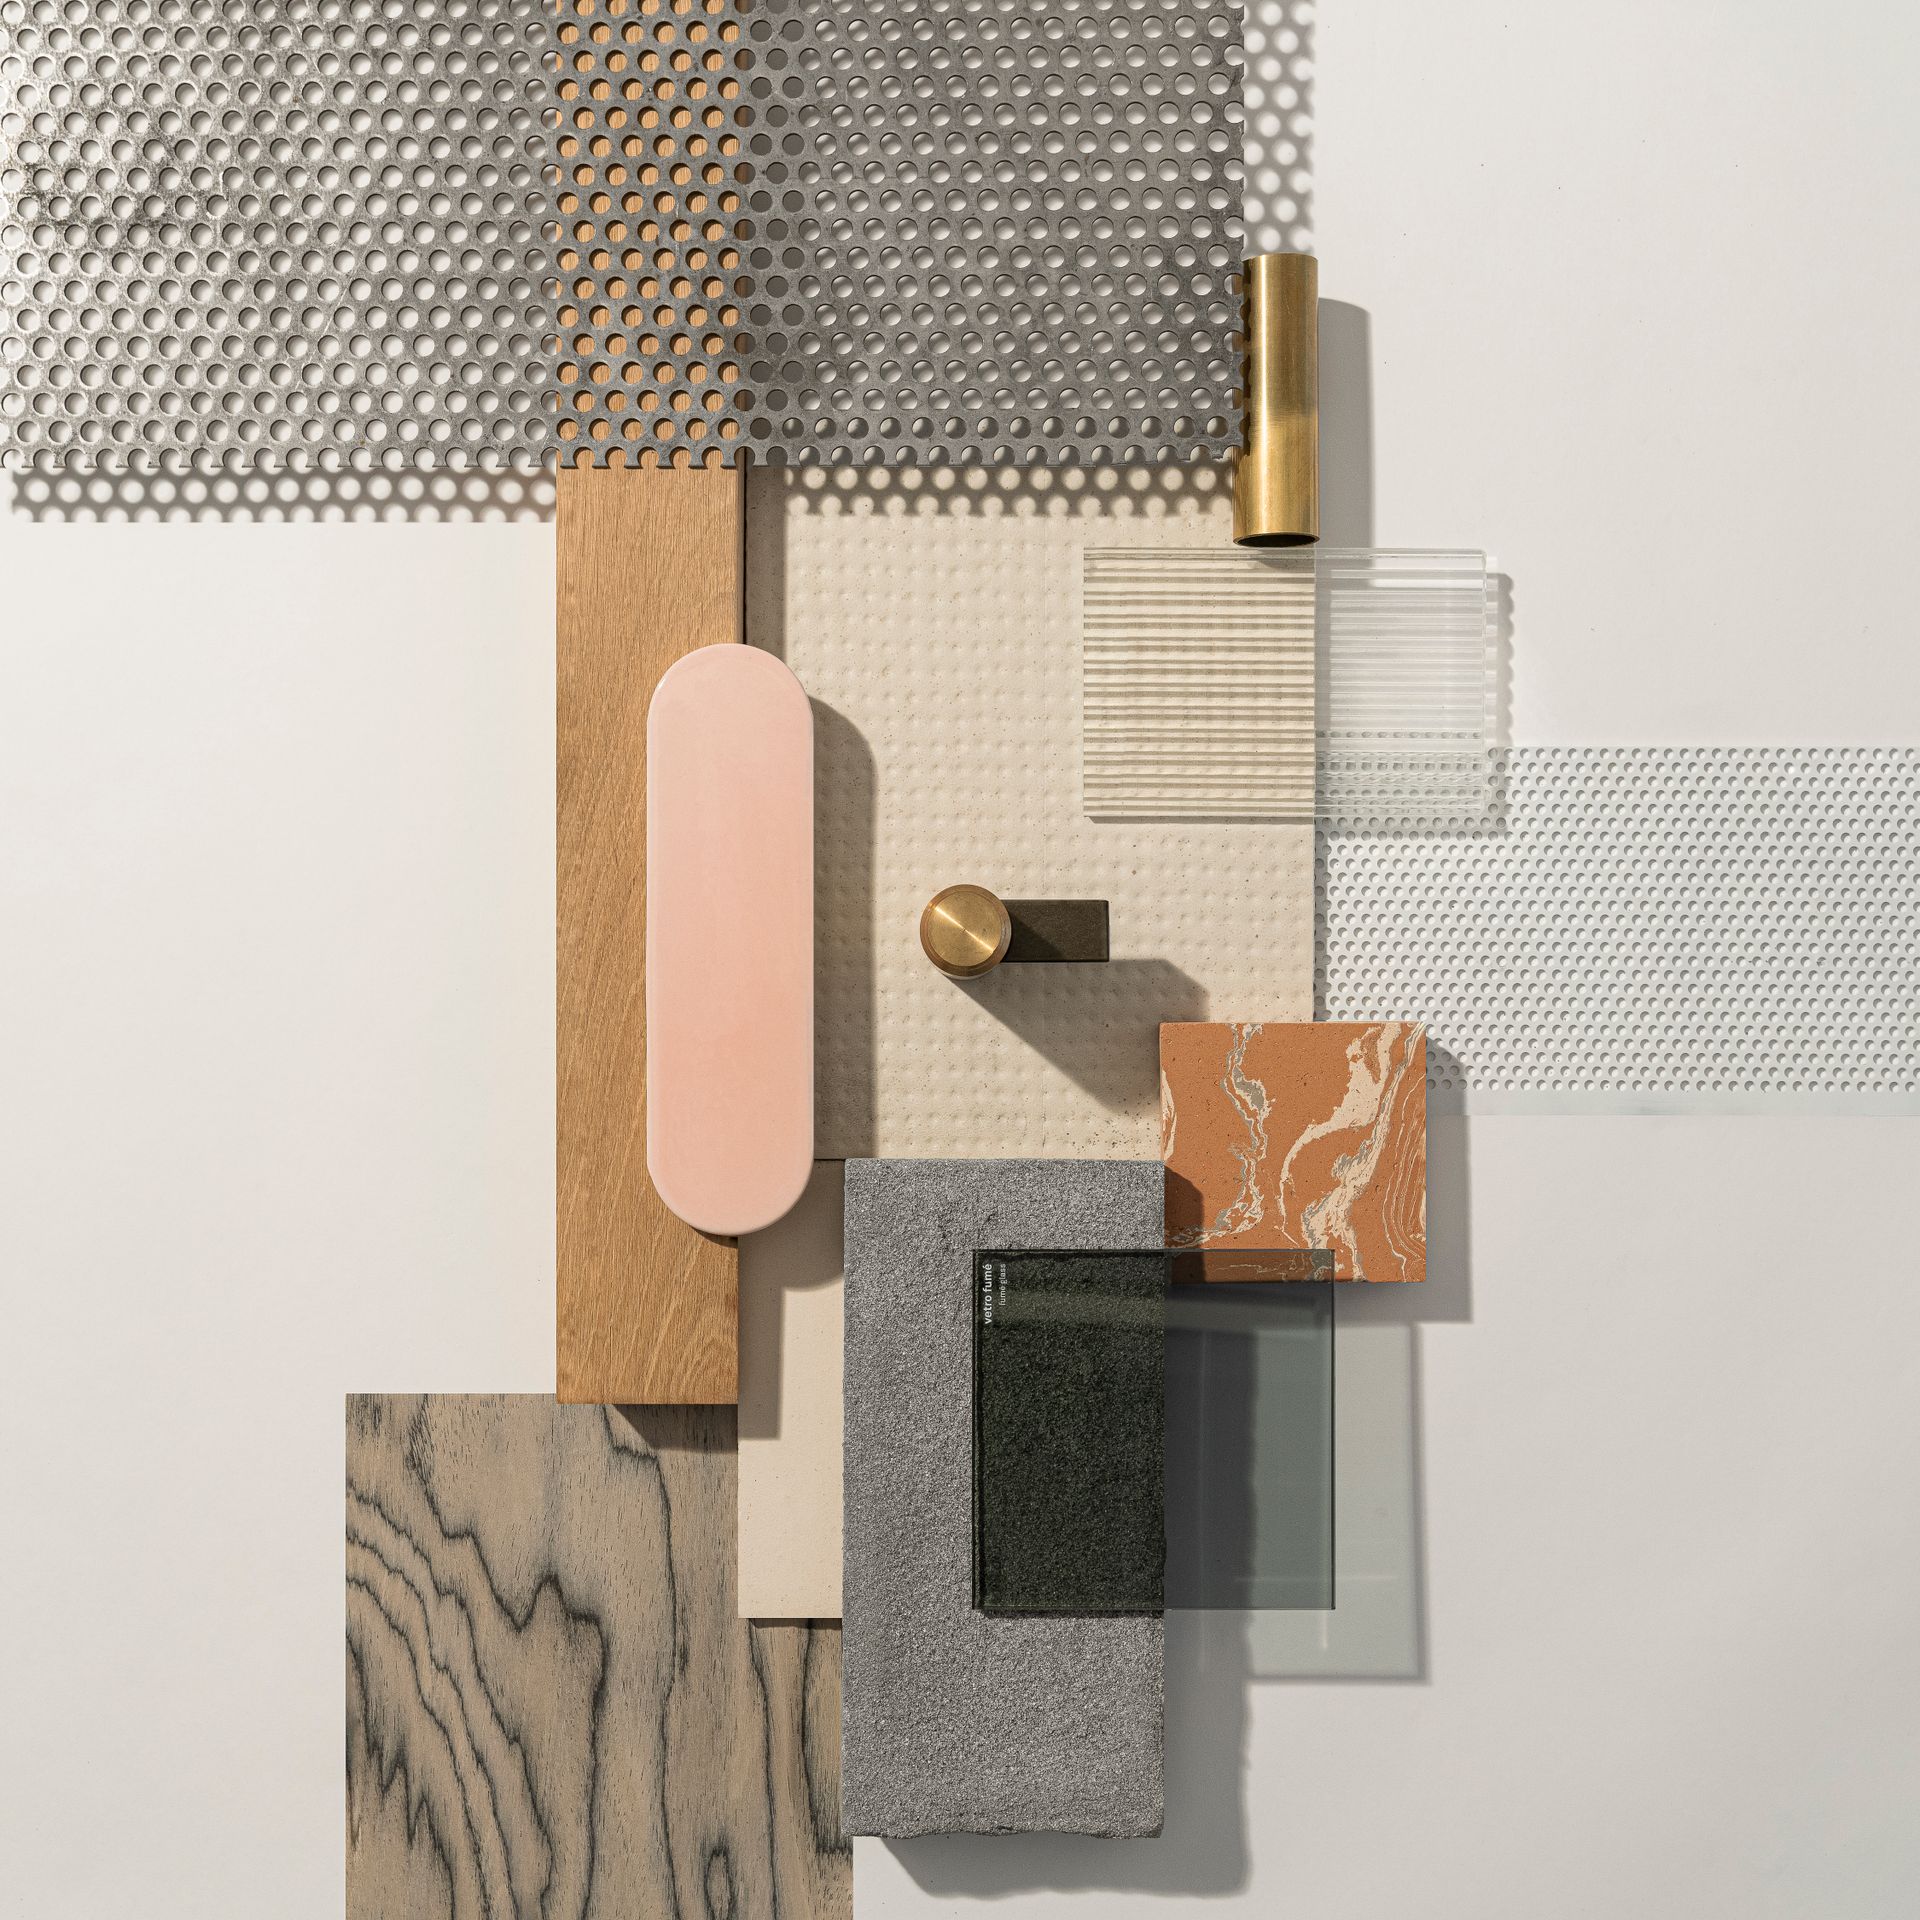 Still life photos materials composition concrete, marble, wood, laminate, glass, tiles, clay. Officina Magisafi architecture design - composition 4